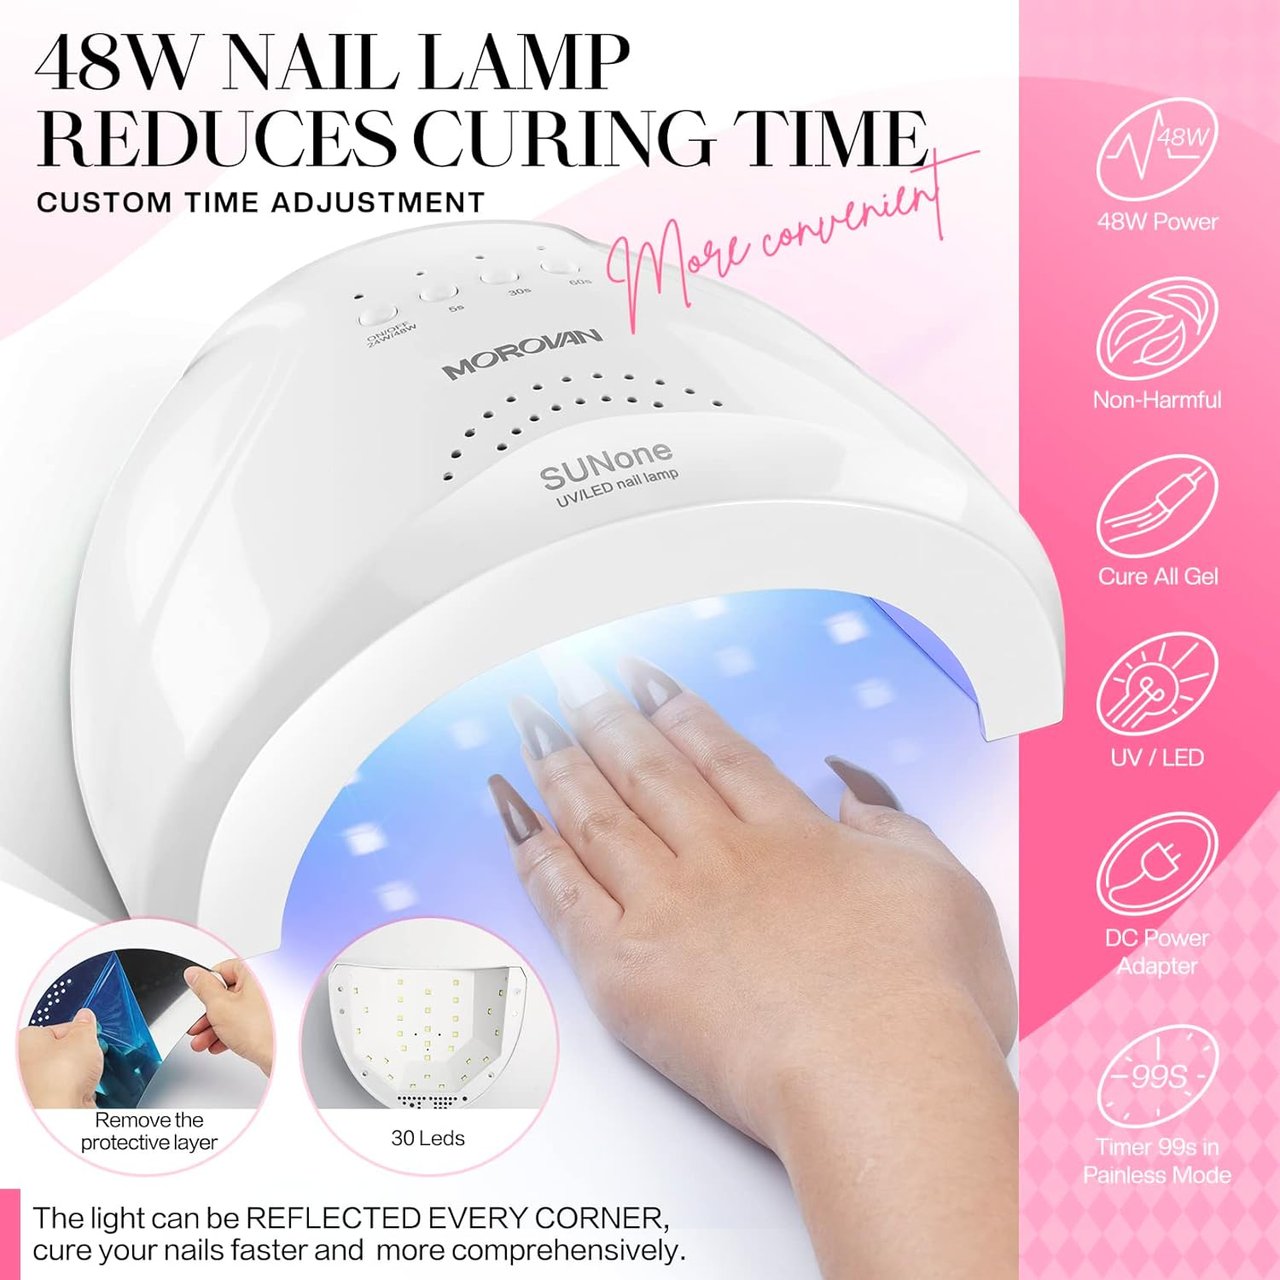 3 Morovan Poly Gel Nail Kit Builder Gel for Nails with 48W LED Nail Lamp Nail Extension Gel 8 Pcs 0.5oz with Slip Solution Nail Prep Dehydrator and Nail Primer Poly Nail Gel Kit Nail Art Supplies